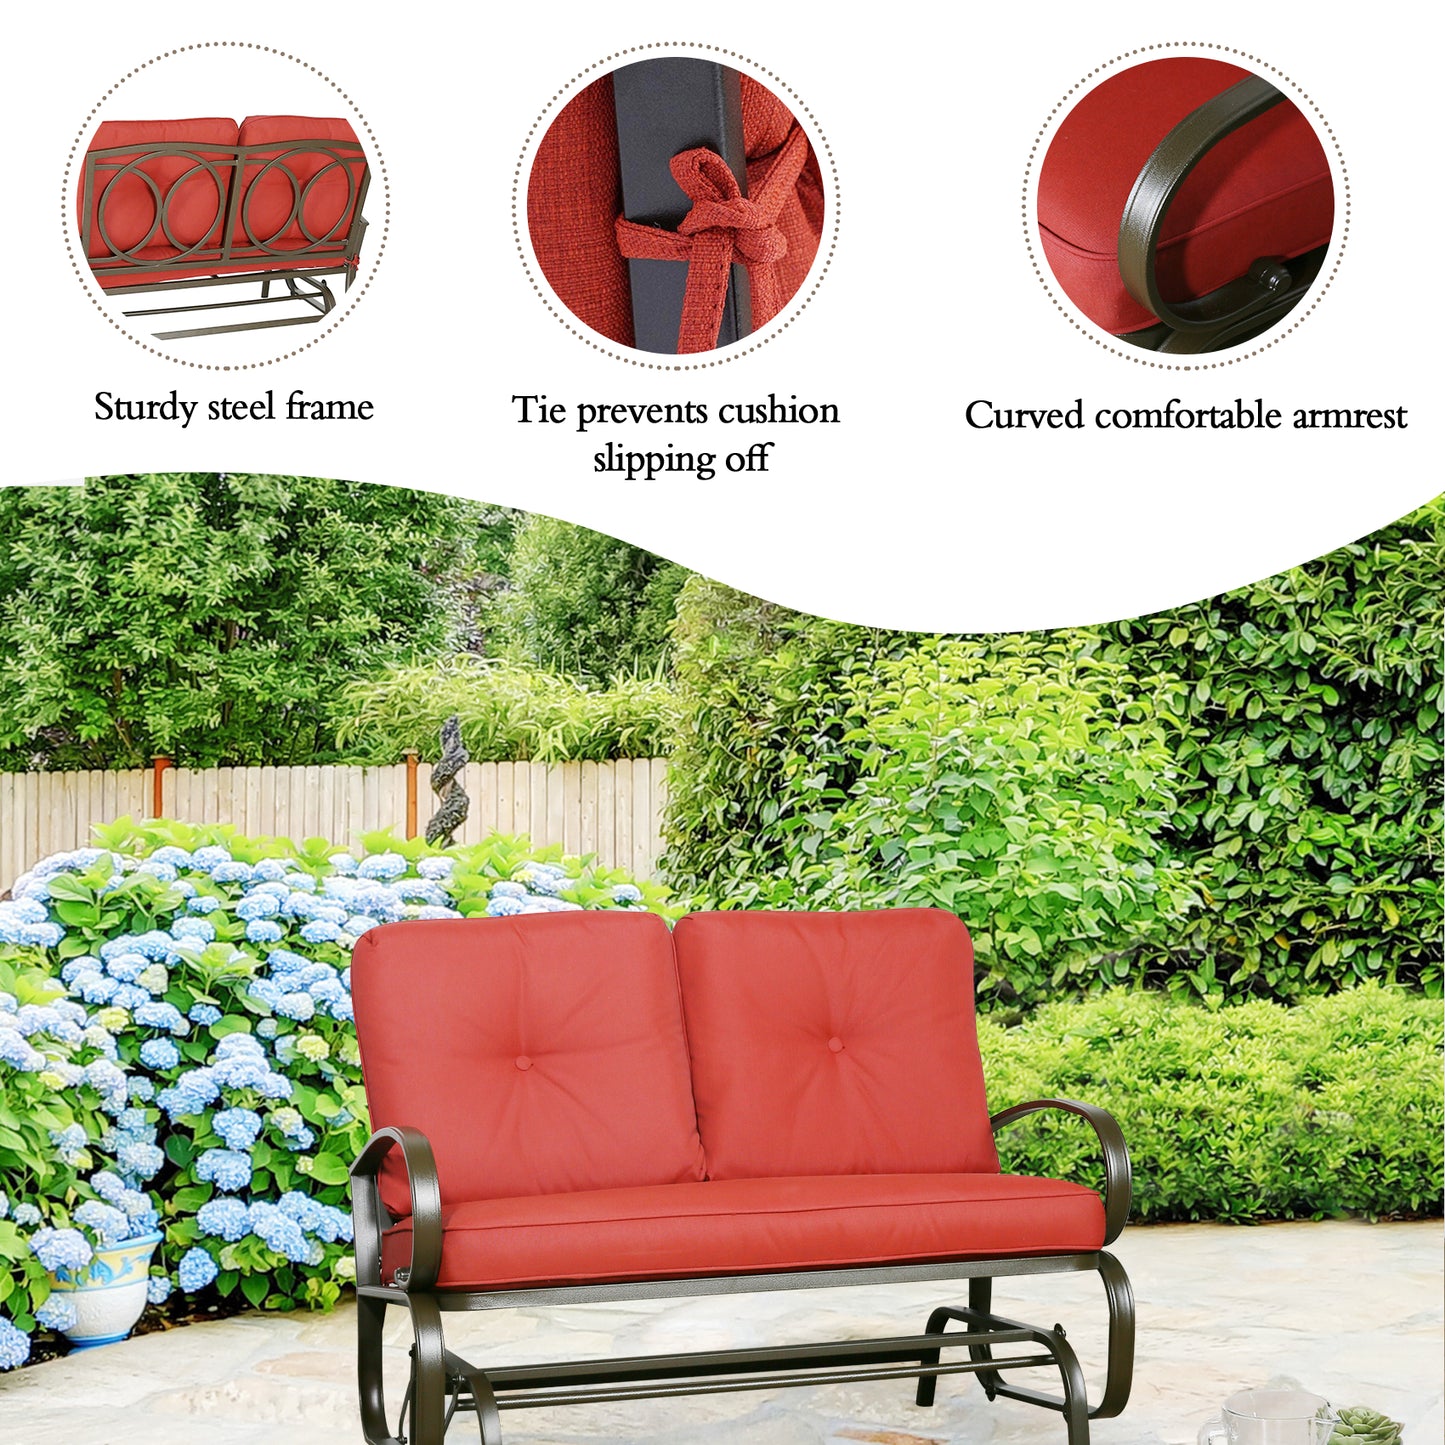 Patio Glider Bench Loveseat Outdoor Cushioed 2 Person Rocking Seating Patio Swing Chair, Red